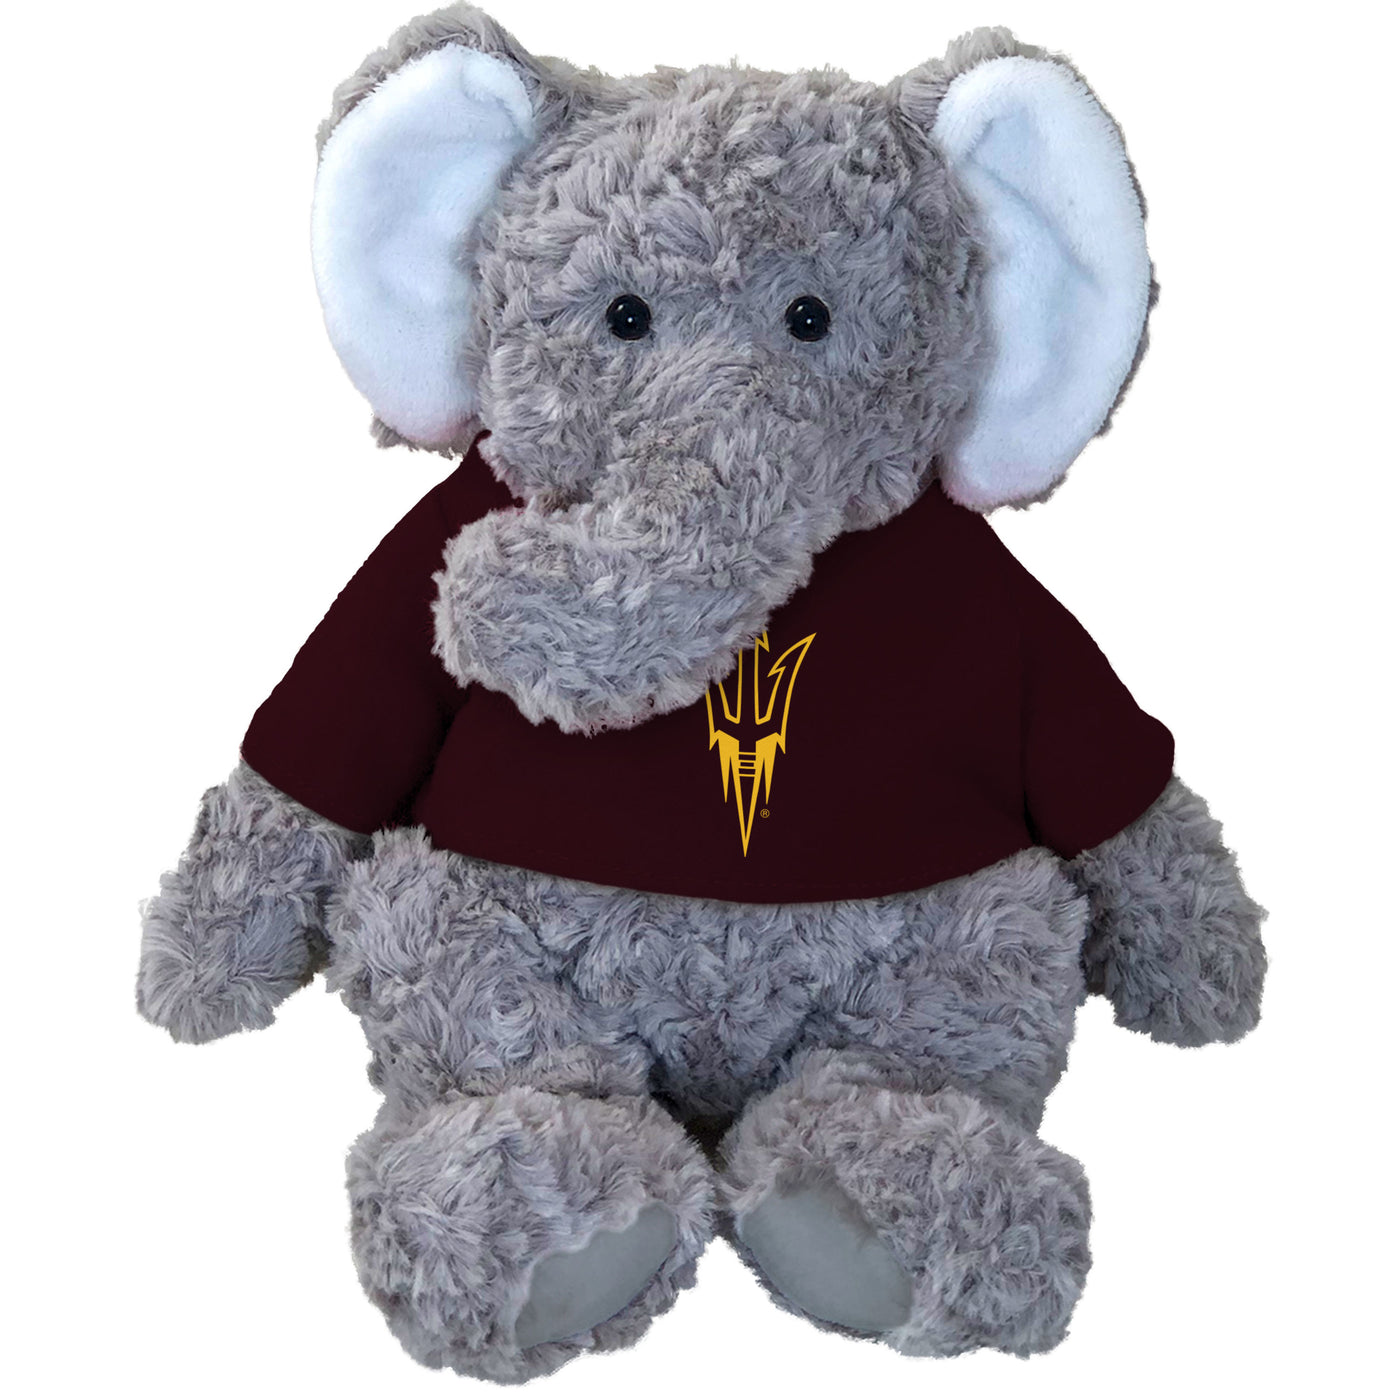 ASU grey stuffed elephant. It wears a maroon shirt with a gold outlined pitchfork logo. 